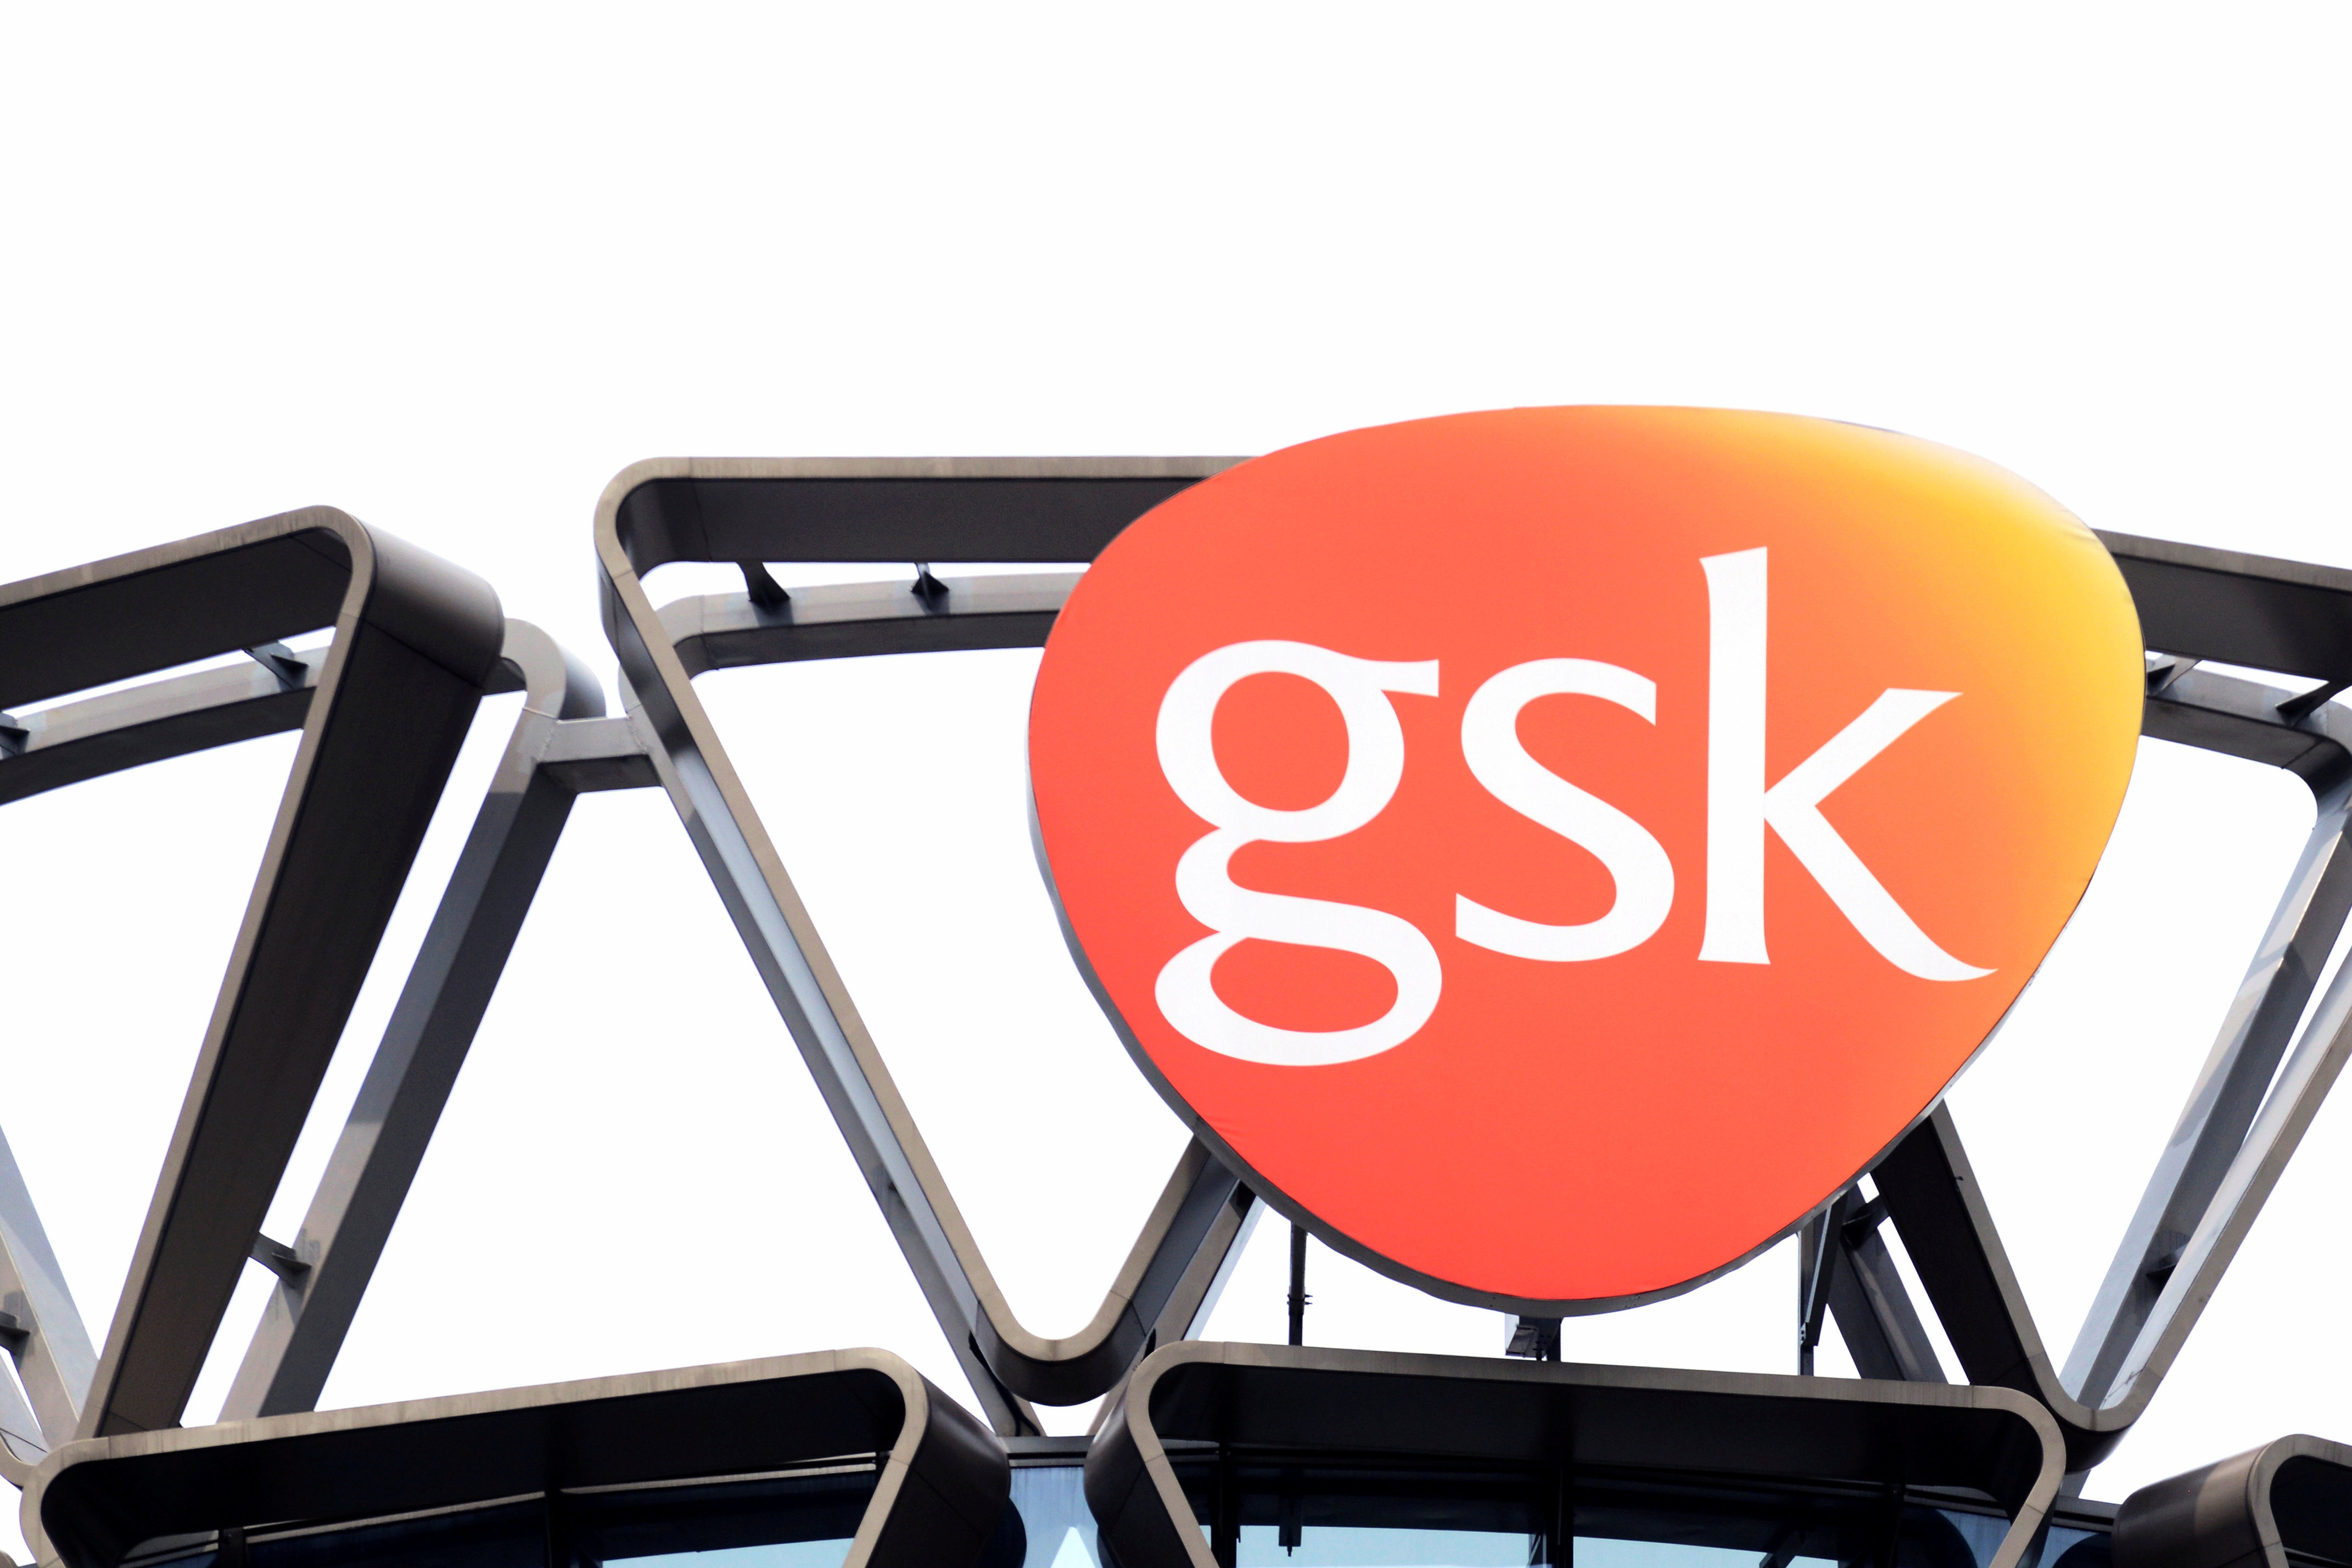 The GlaxoSmithKline (GSK) logo is seen on top of GSK Asia House in Singapore, March 21, 2018. Picture taken March 21, 2018. REUTERS/Loriene Perera/File Photo